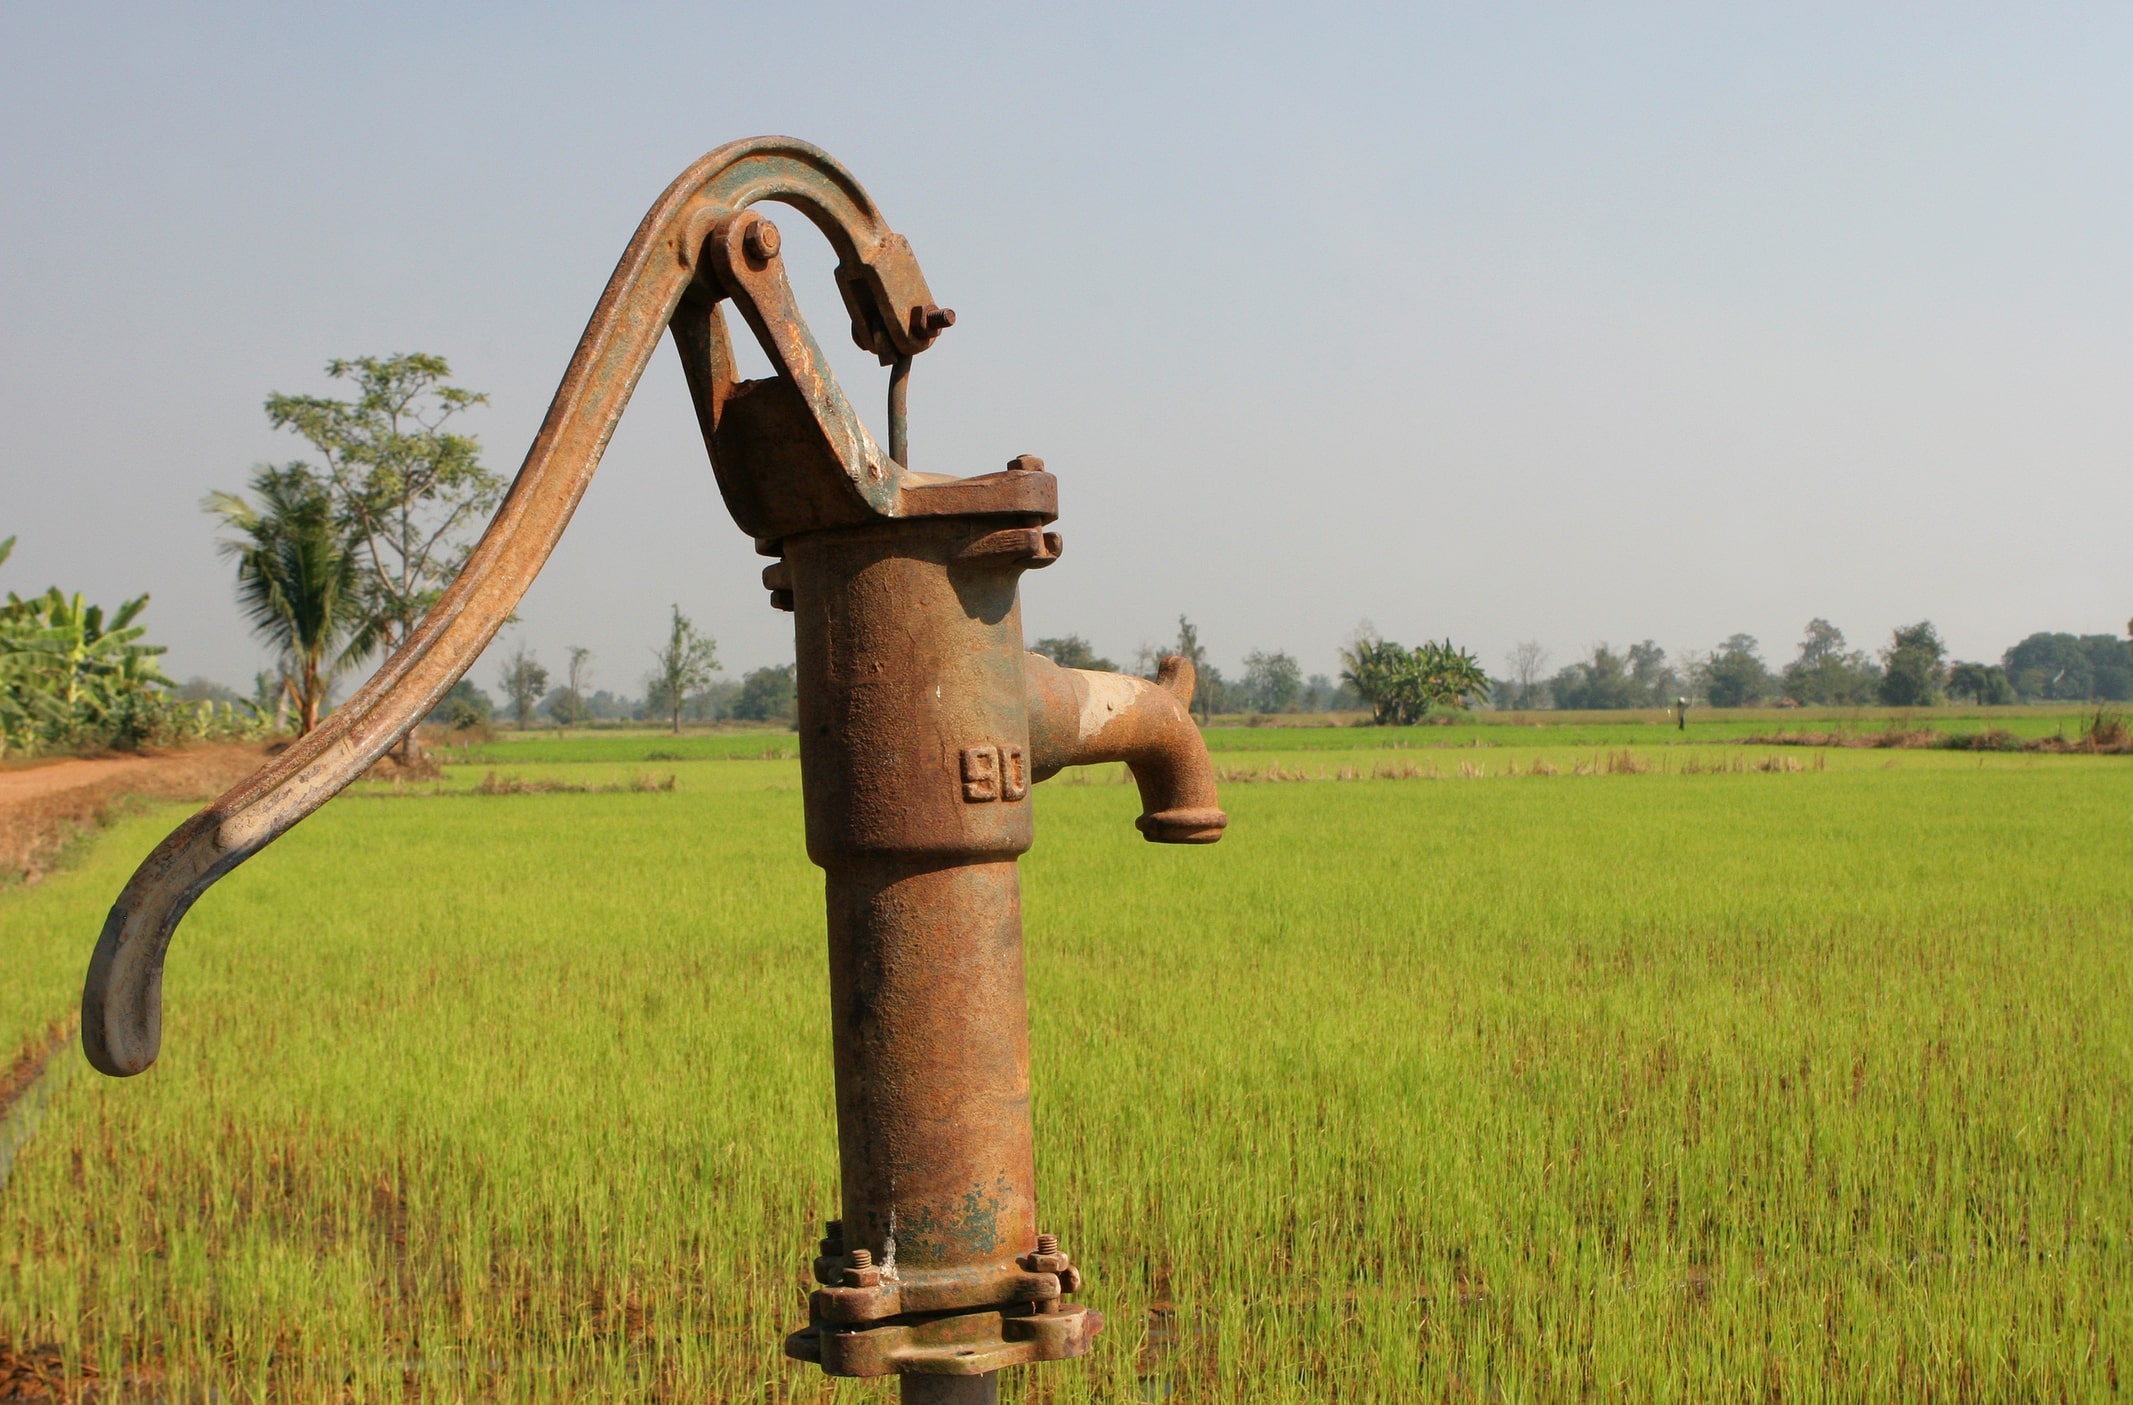 A hand-cranked pump in a rice field